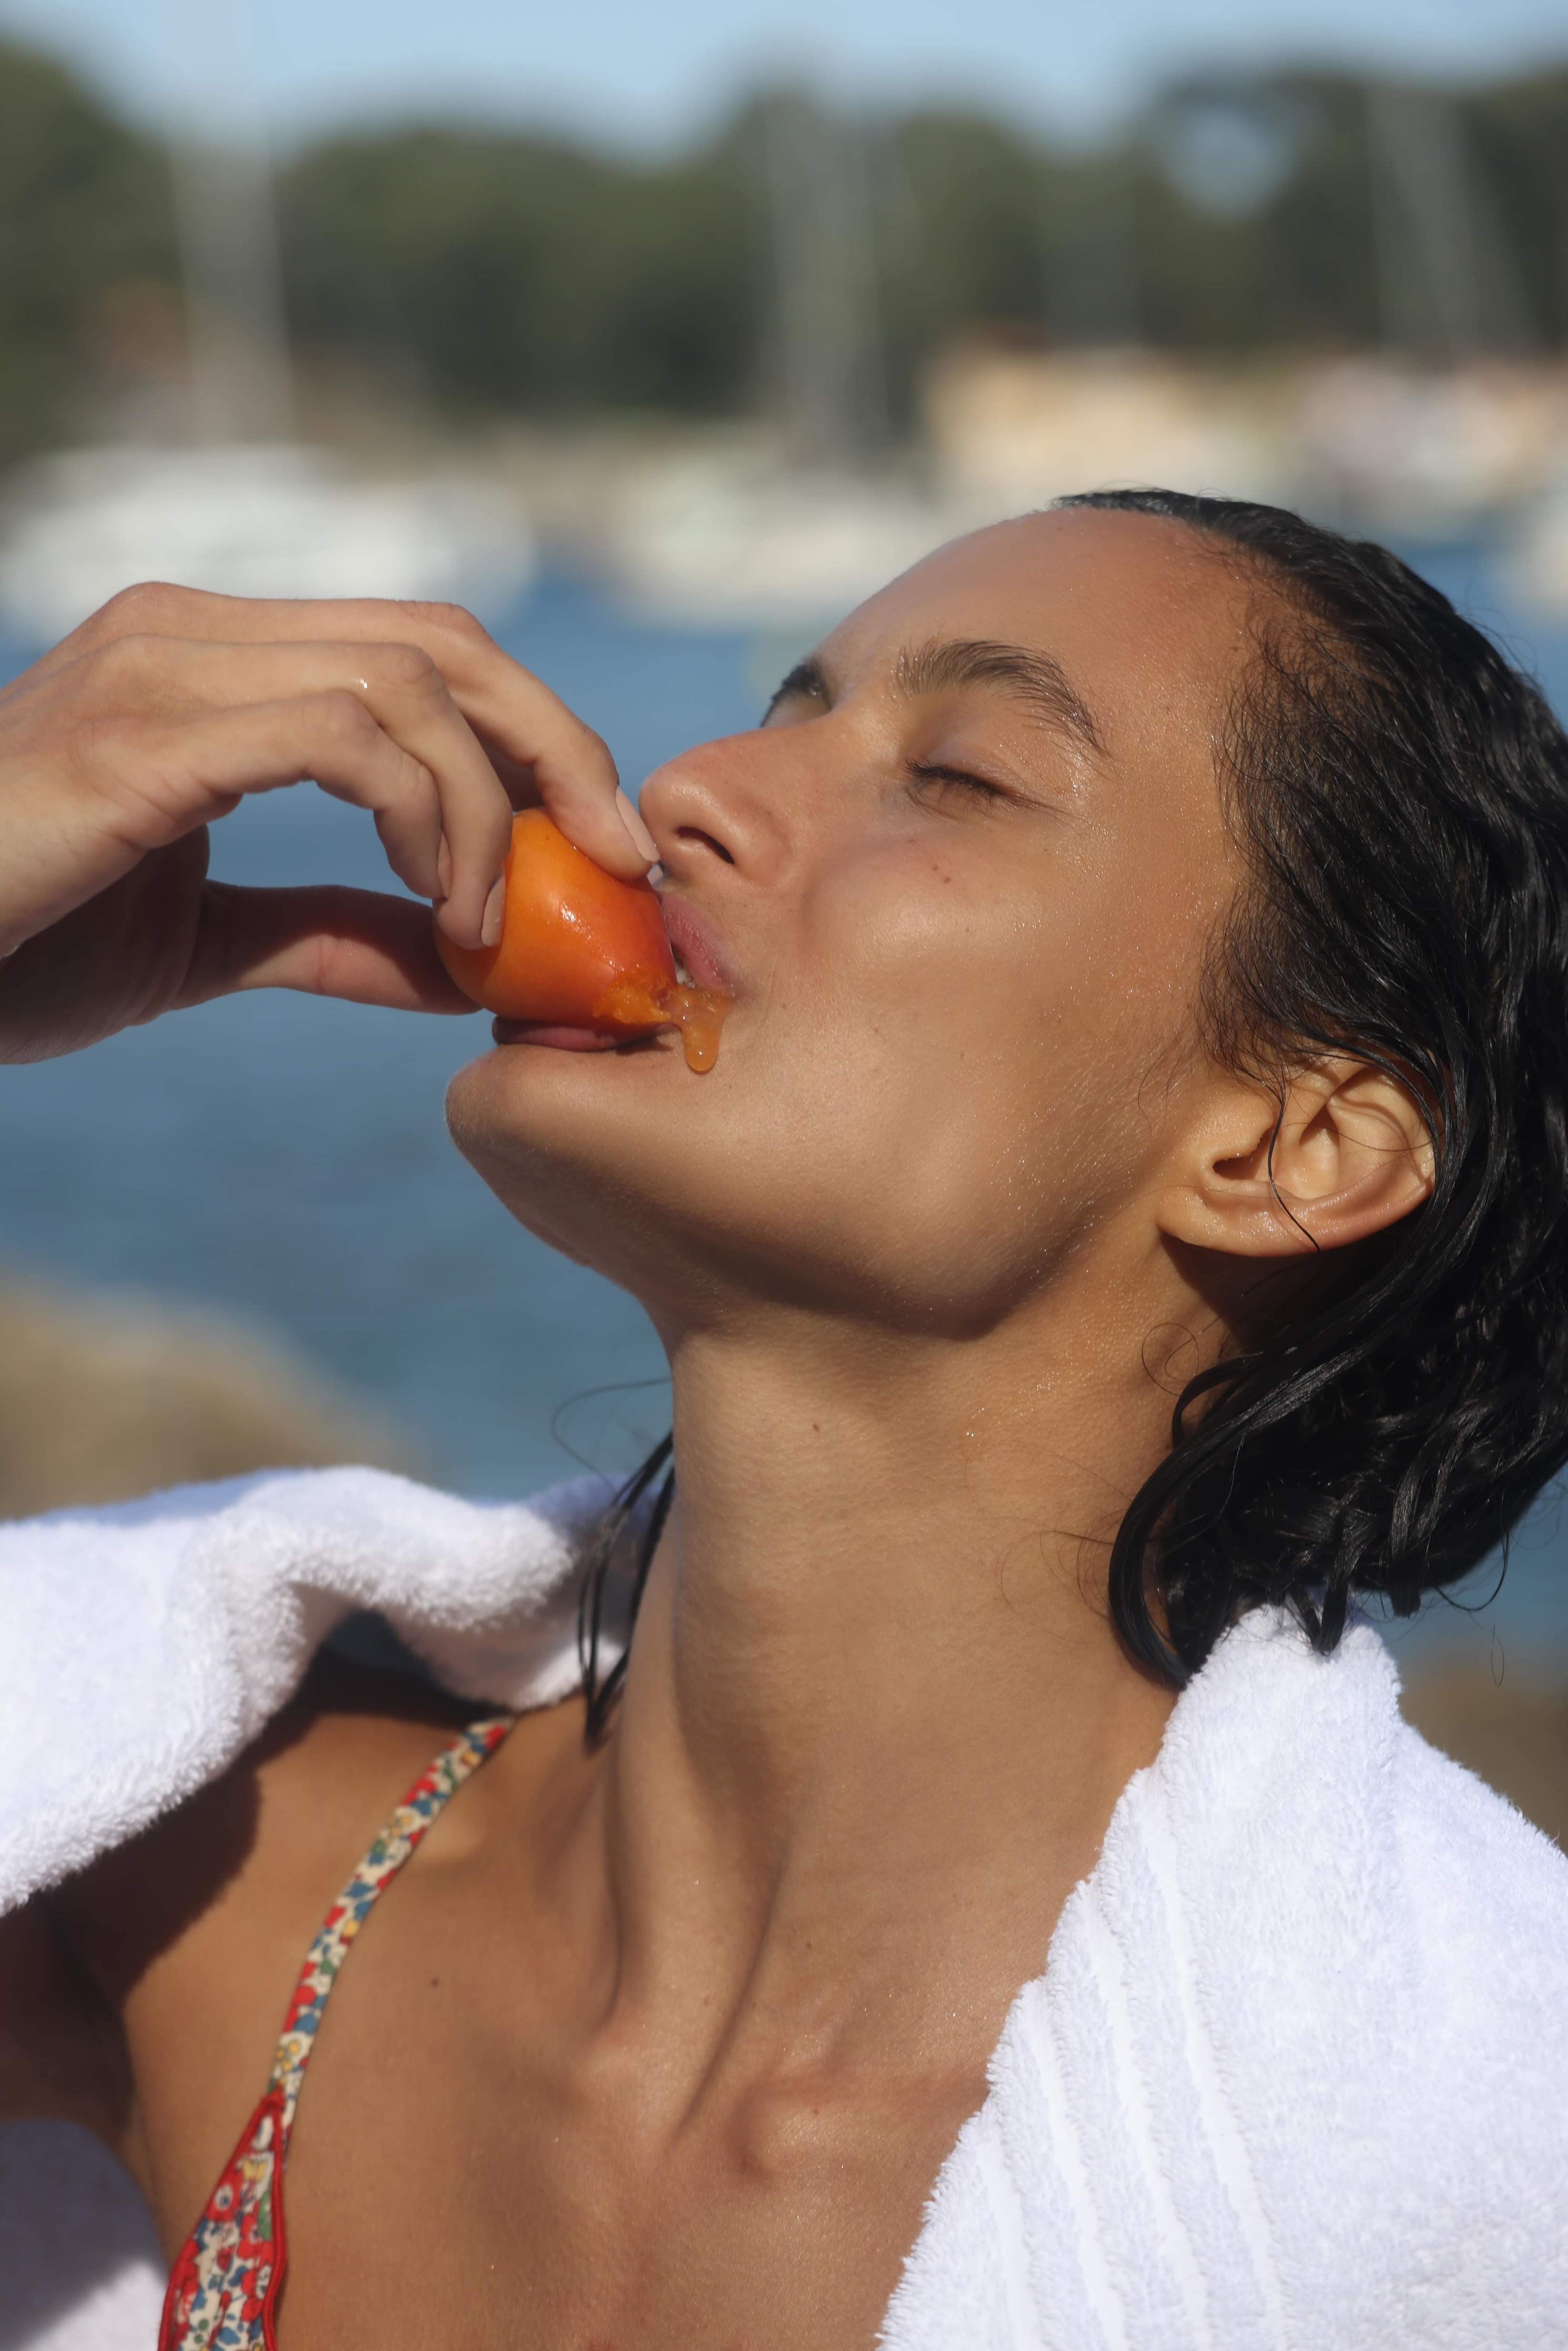 Woman eating an Apricot while by the sea